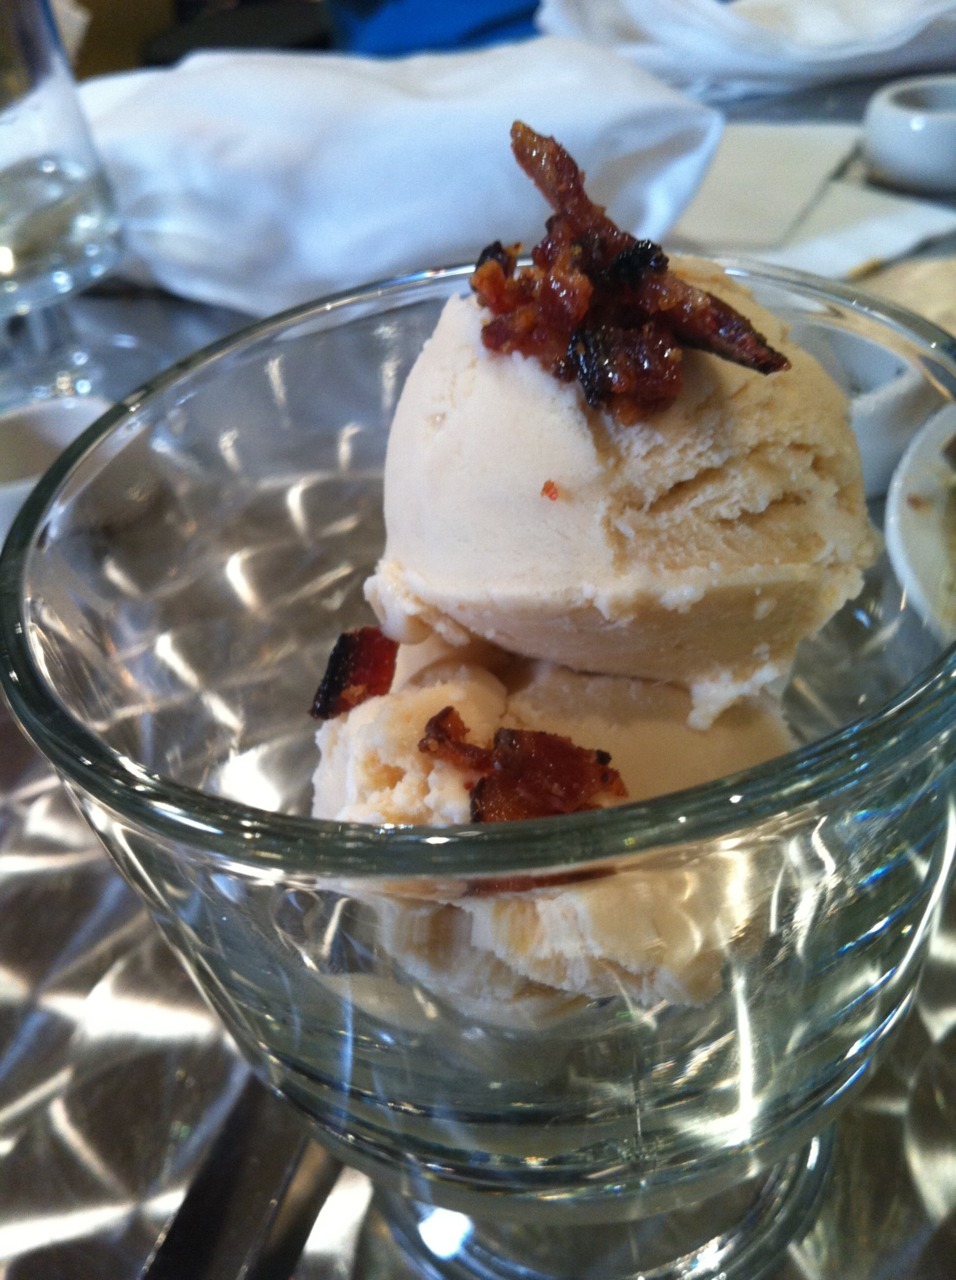 Richard Blais’s bacon ice cream. If you’re in New York today, please go to this place.